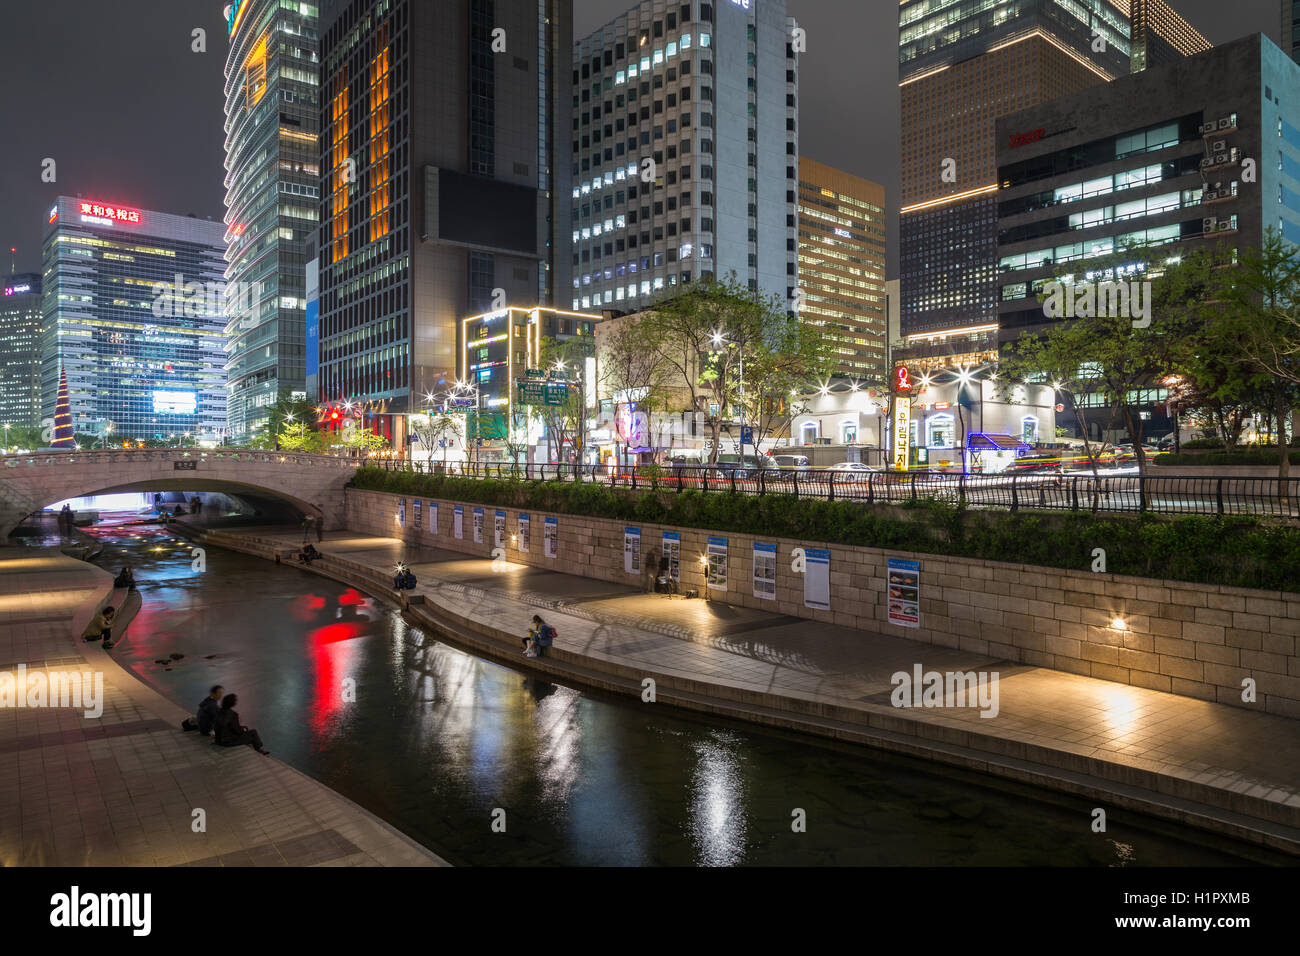 View of Cheonggyecheon Stream and buildings in the downtown of Seoul, South Korea in the evening. Stock Photo